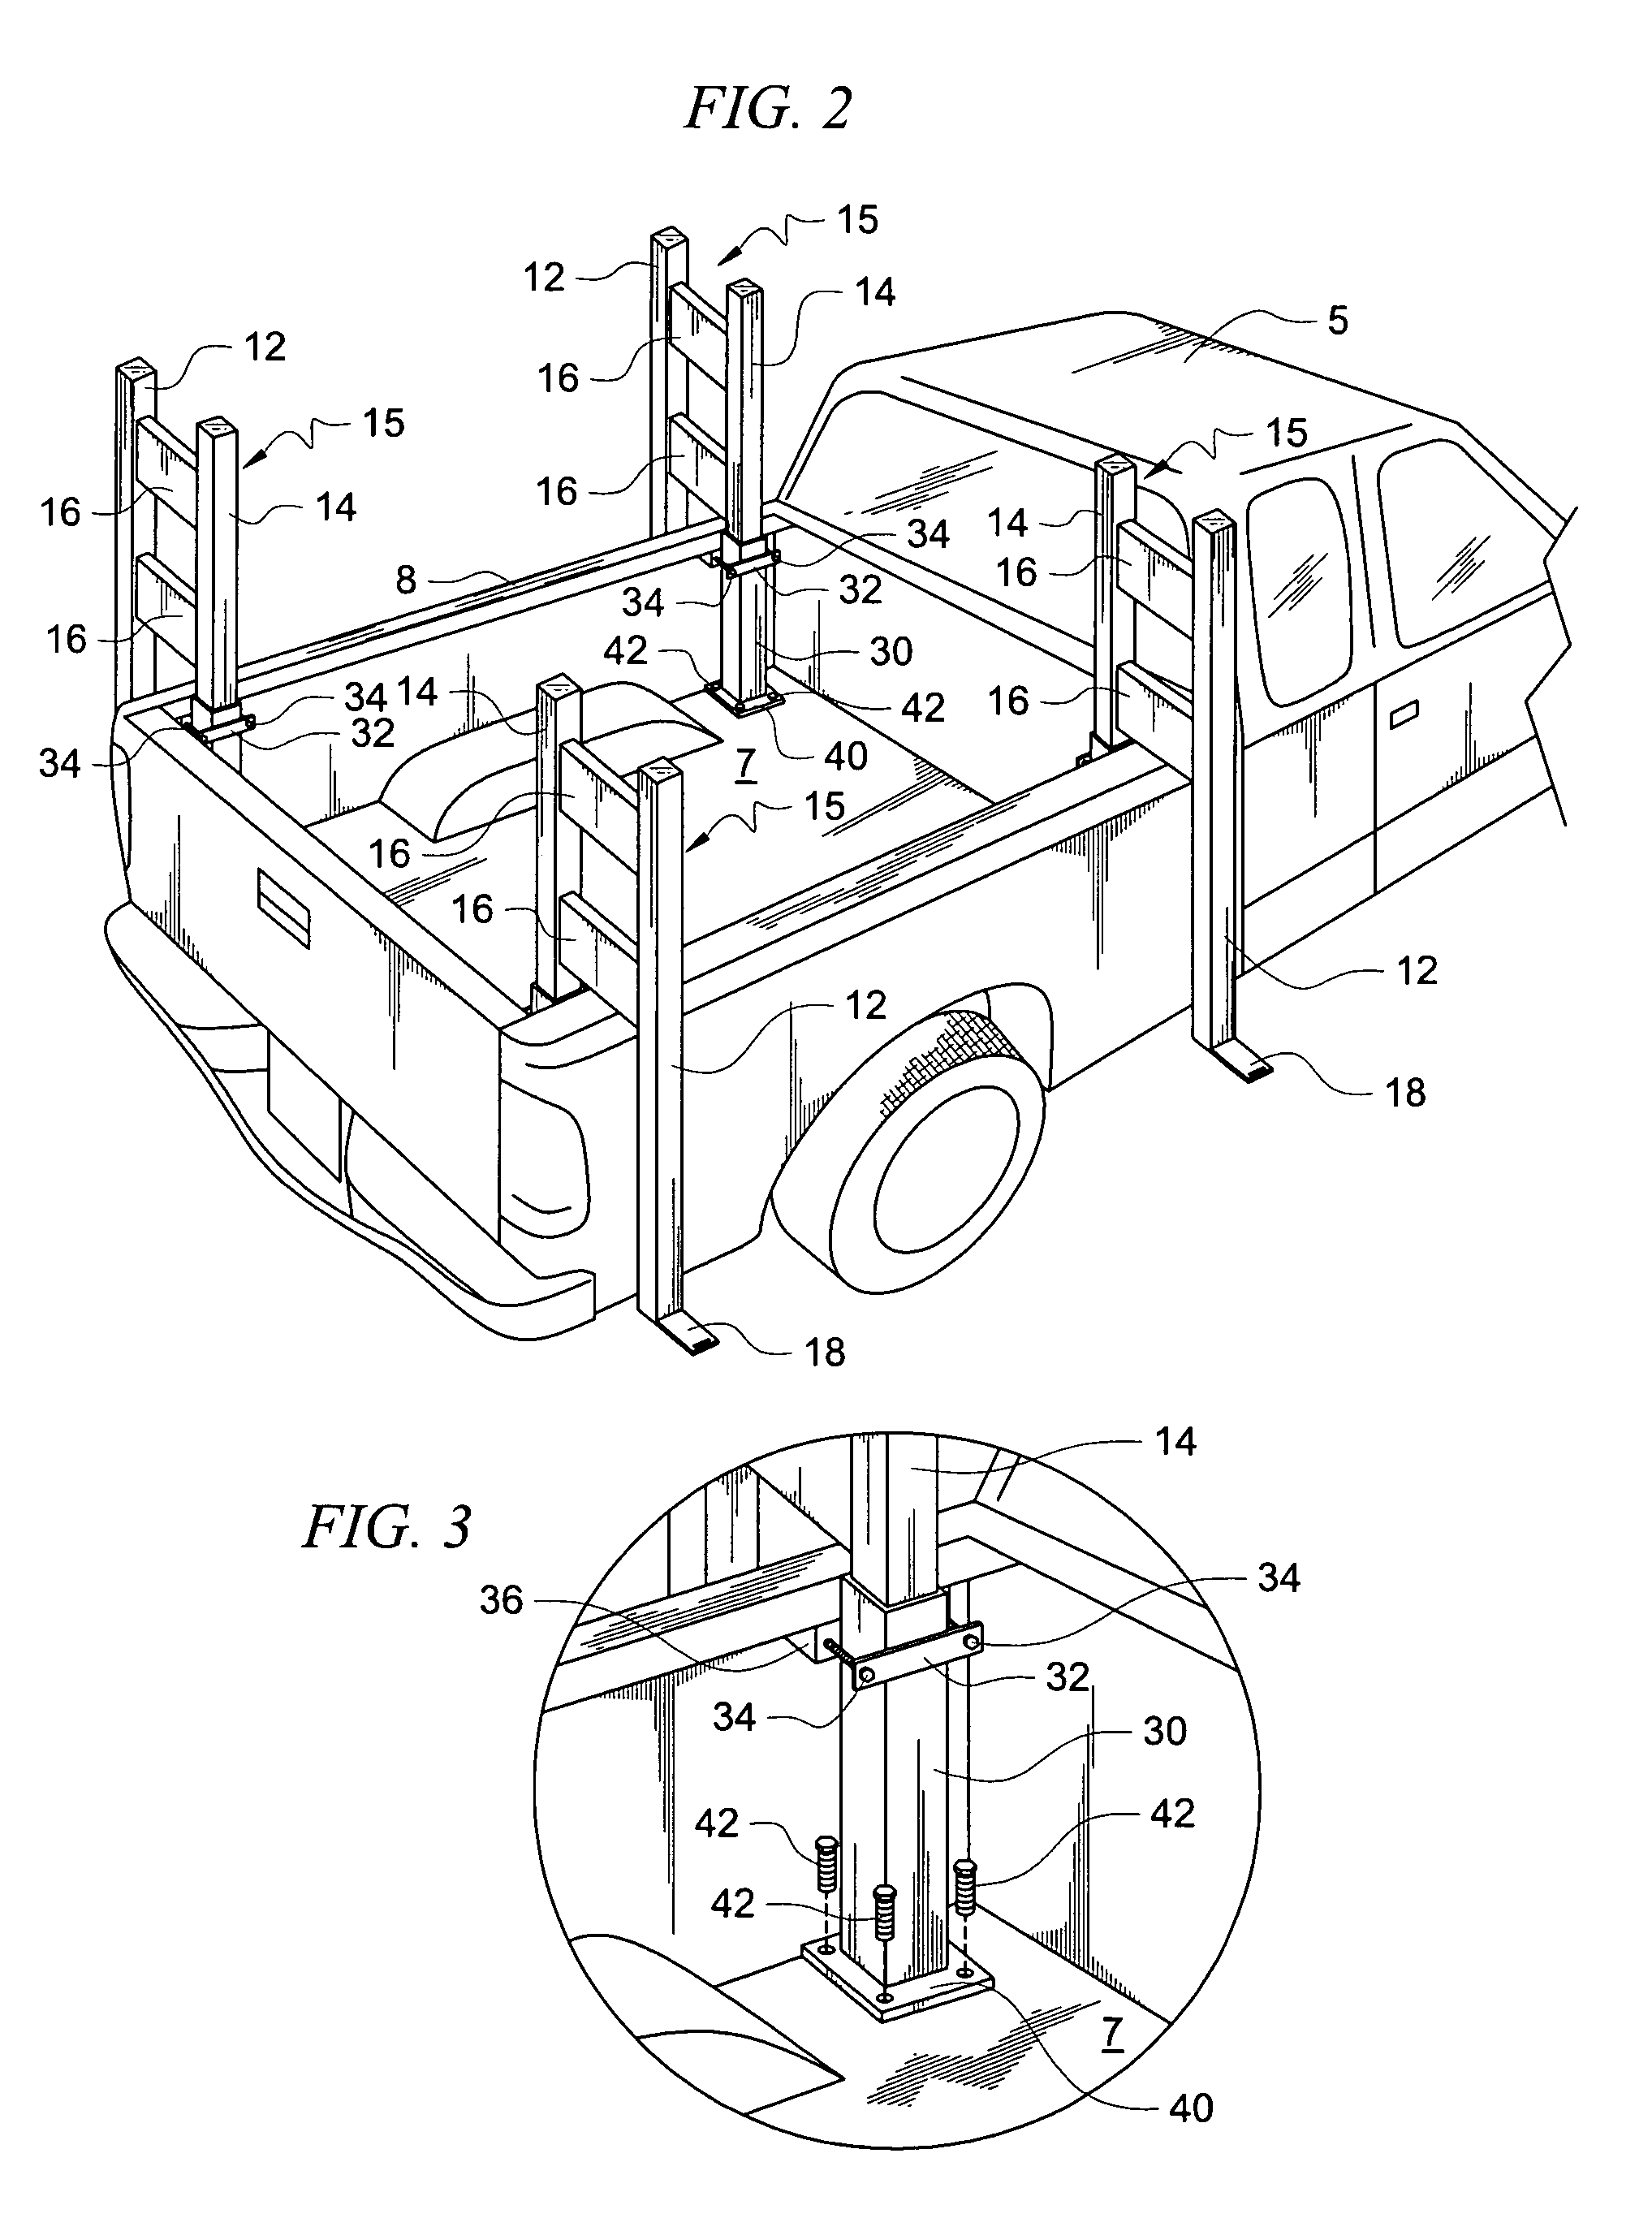 Method and apparatus for transporting planar sheets of material